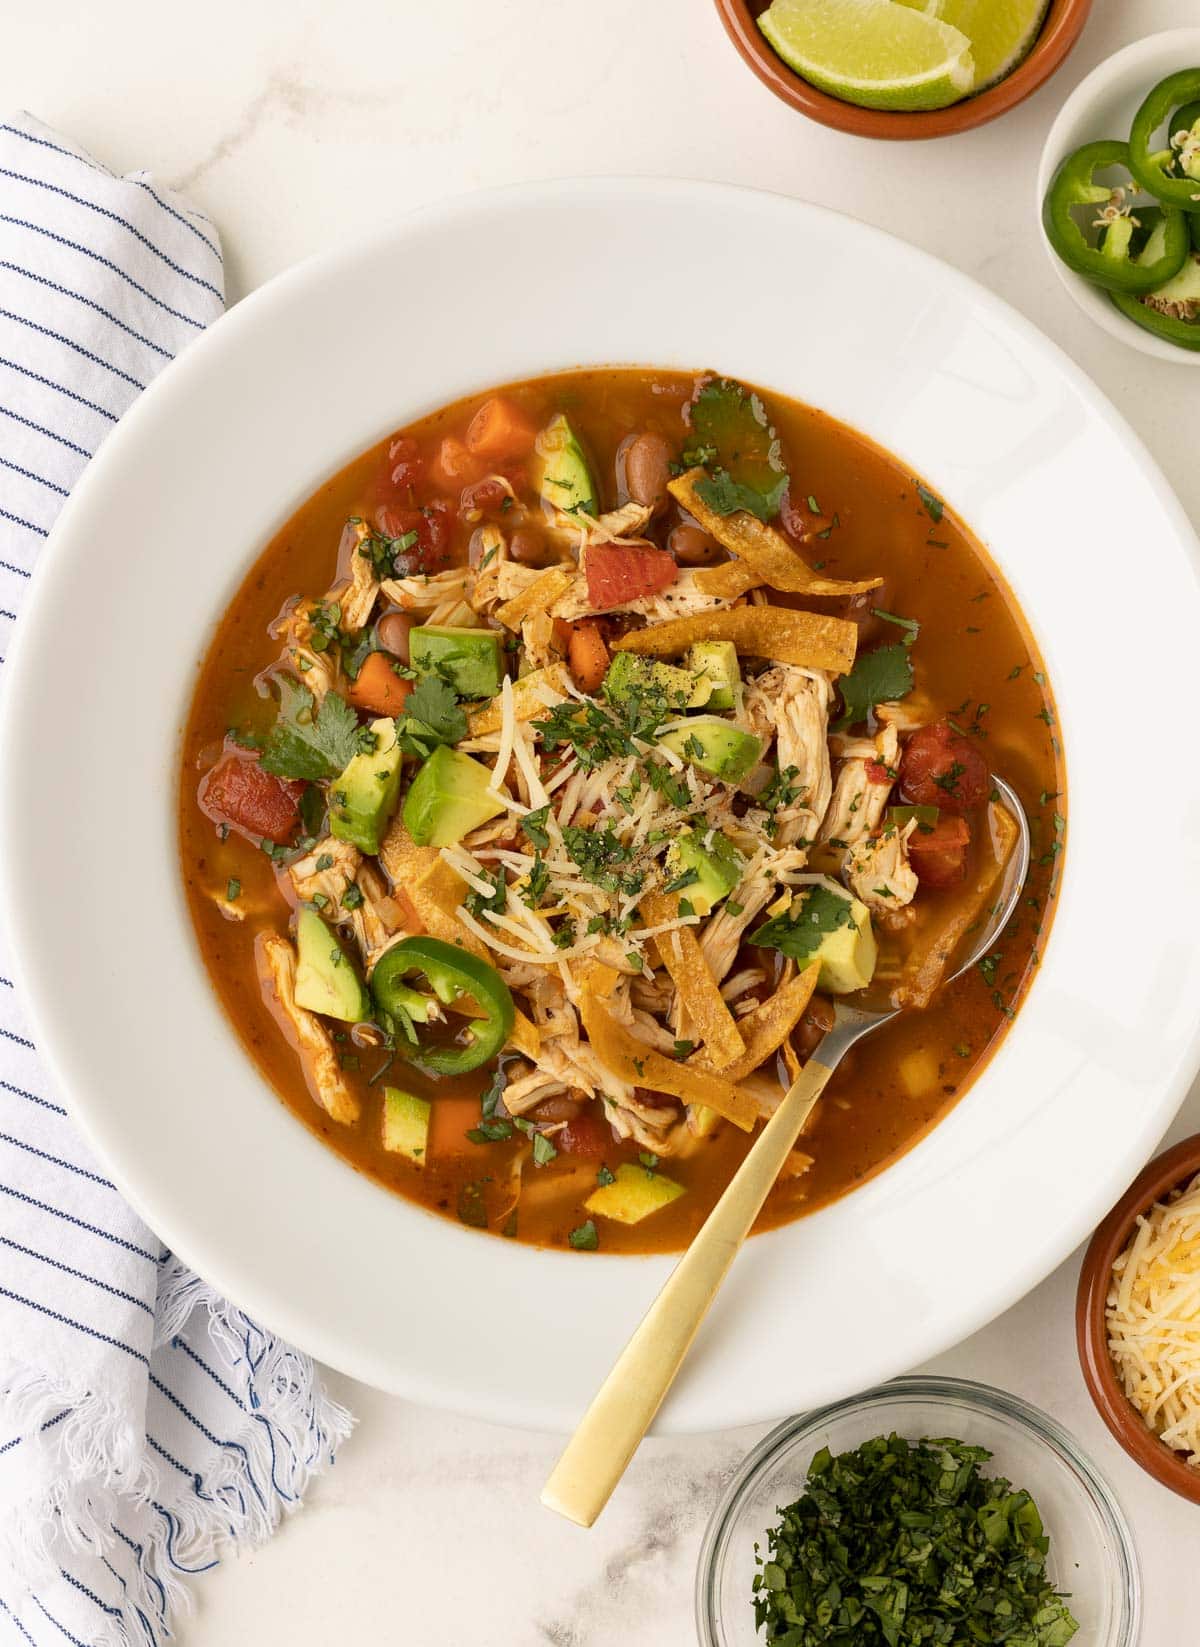 Mexican tortilla soup, ready to serve with garnishes in side bowls.